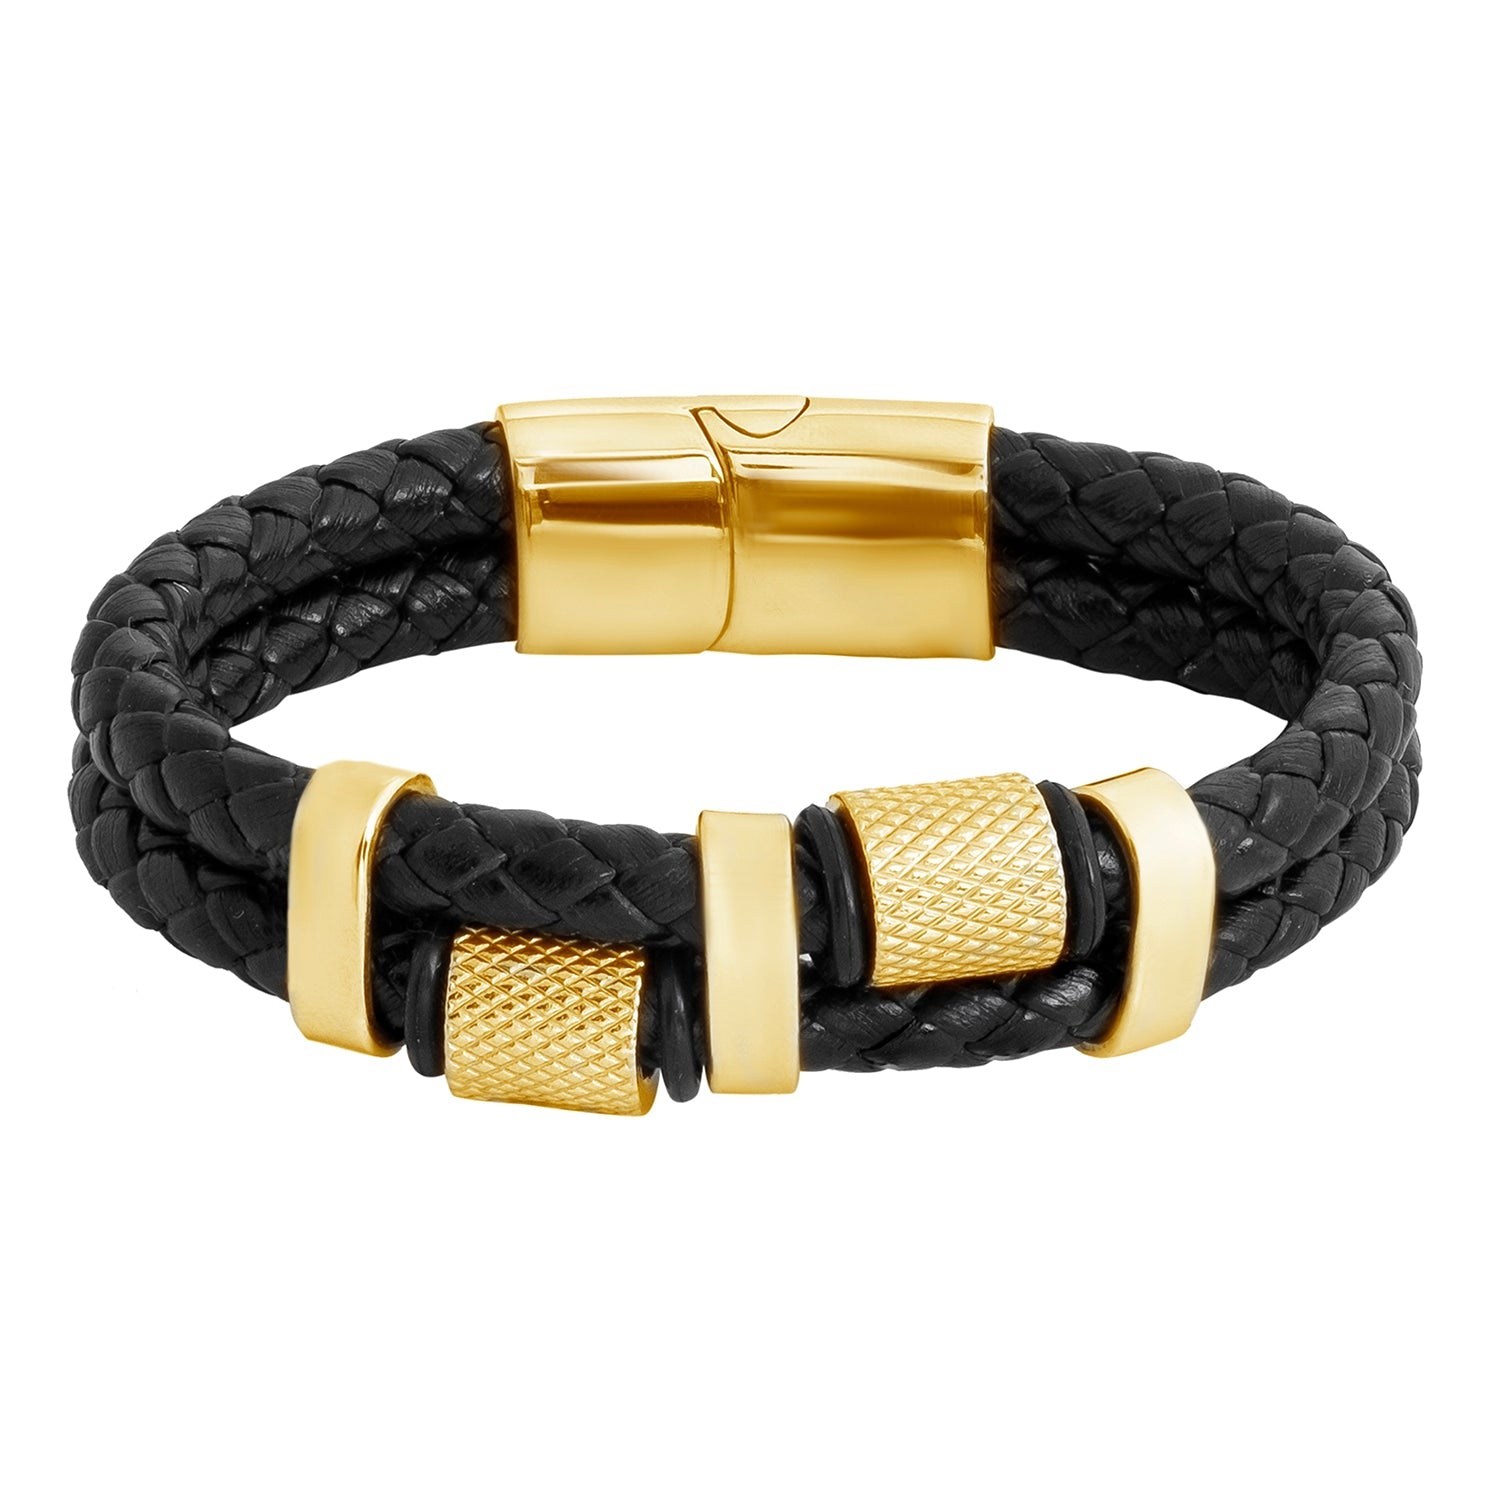 There have been gold jewelry trends for years, but what about men's je –  STEEL & BARNETT